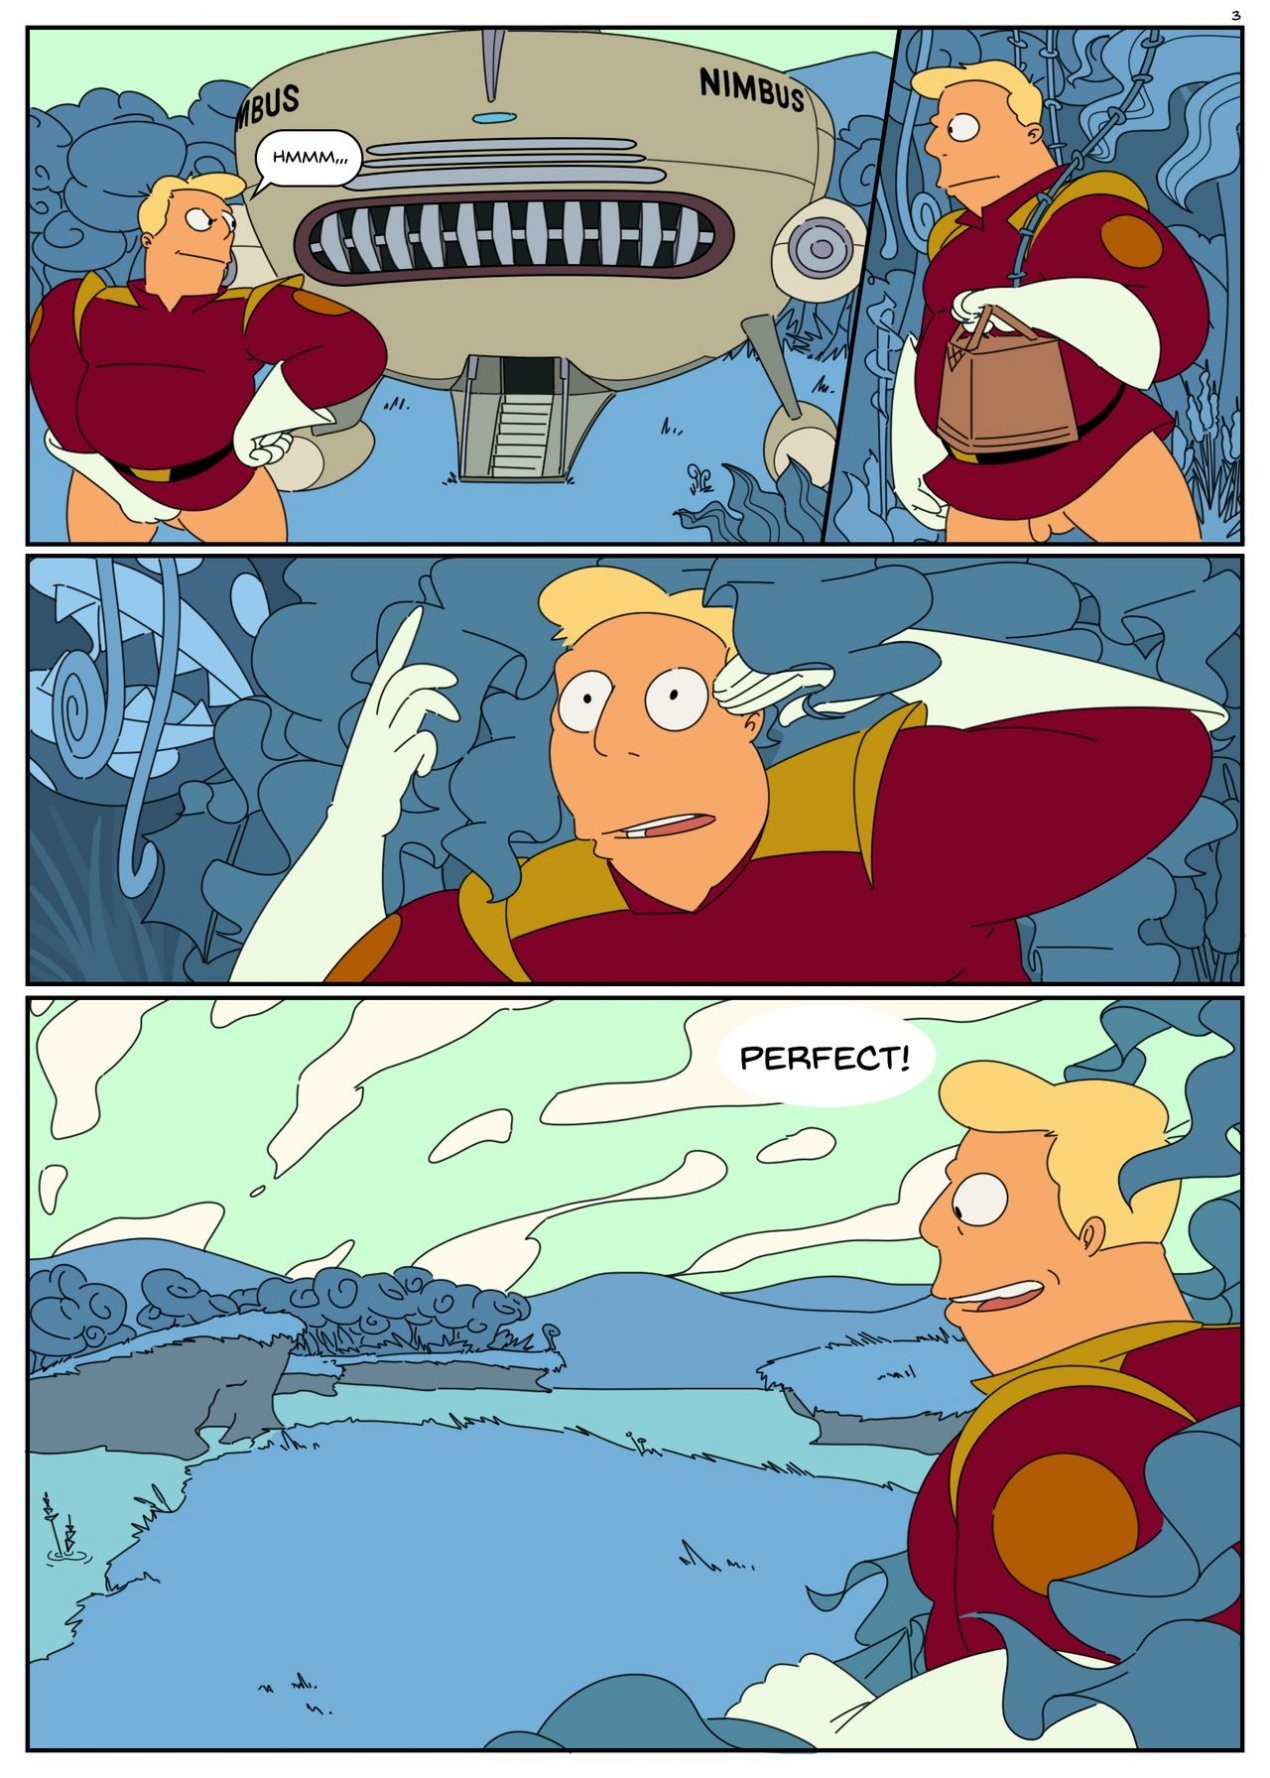 ZAPP BRANNIGAN & THE MISTERIOUS OMICRONIAN porn comic picture 4